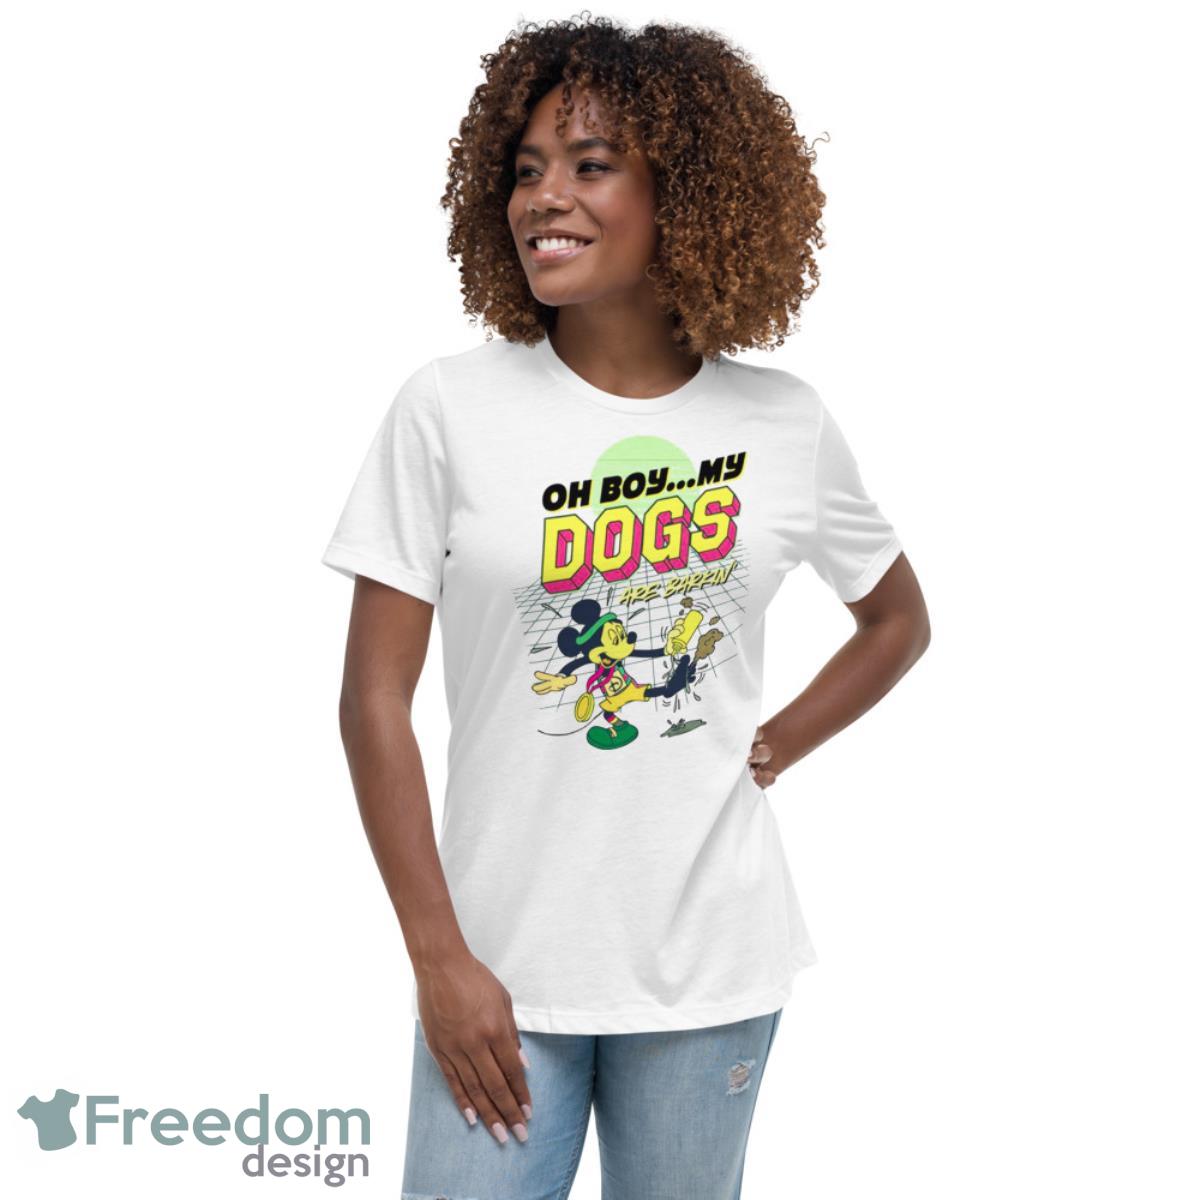 Oh boy my dogs are barking shirt